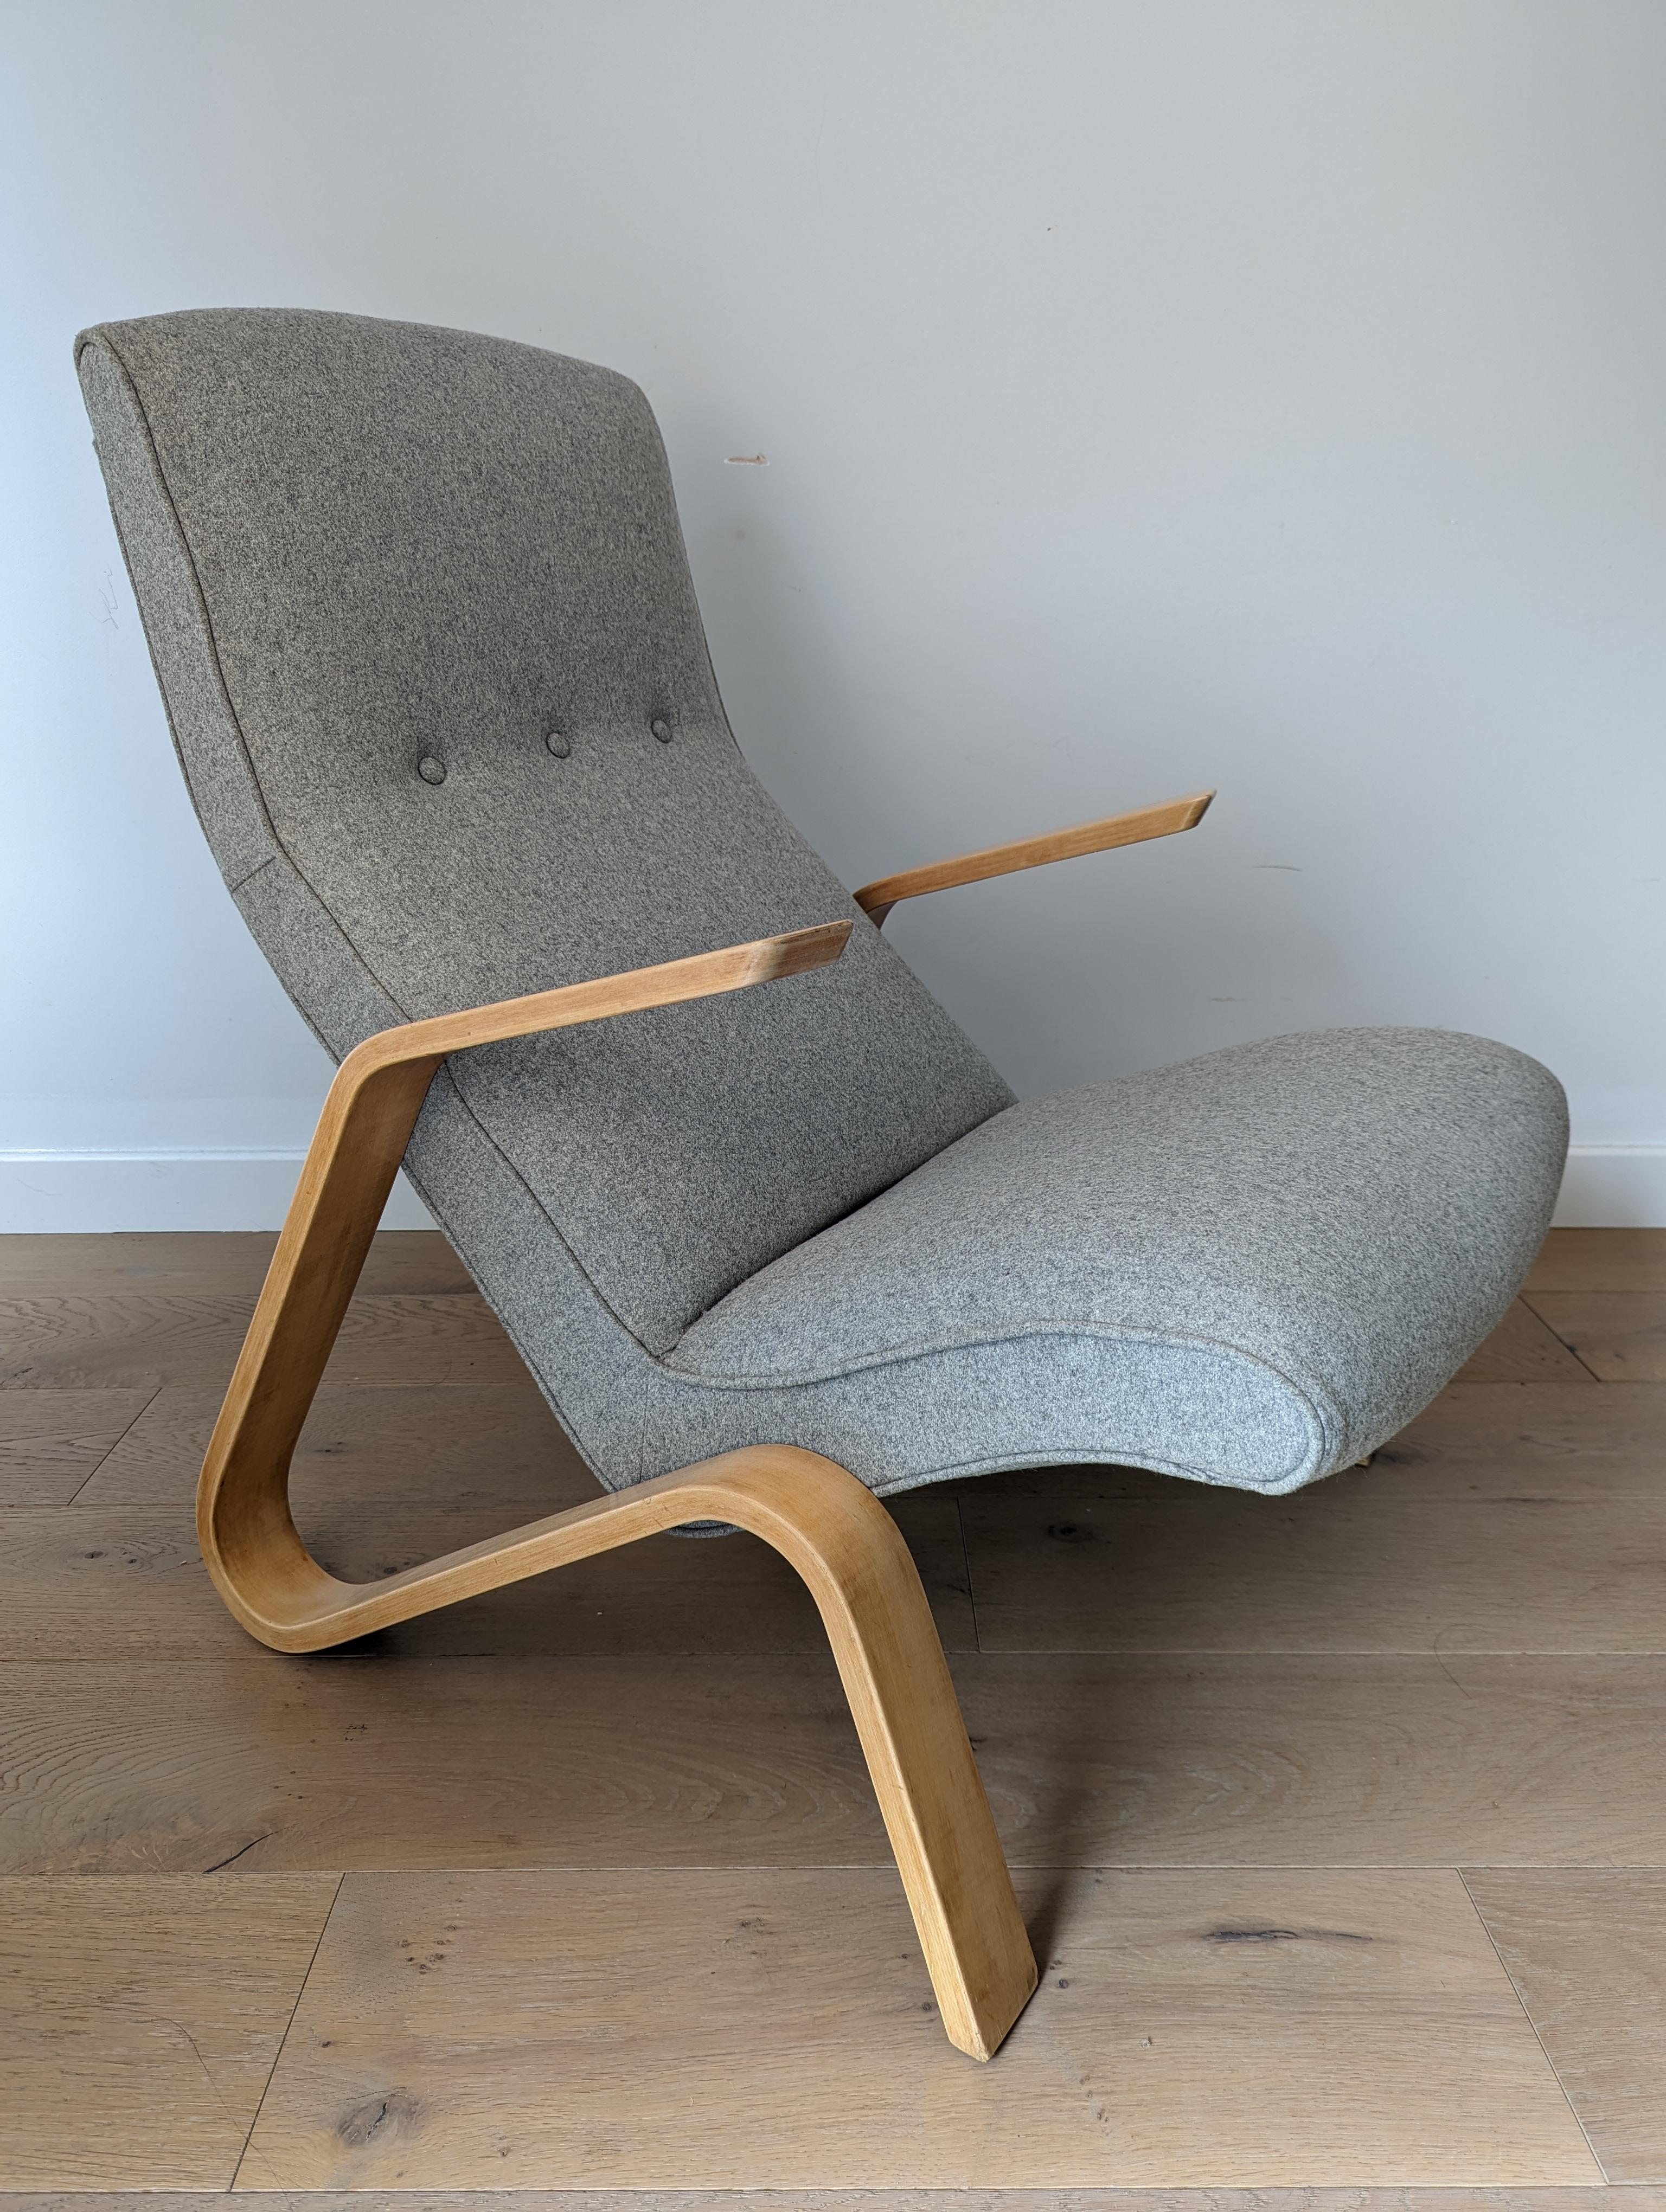 Mid-century Grasshopper chair by Eero Saarinen for Knoll (1950s) For Sale 2